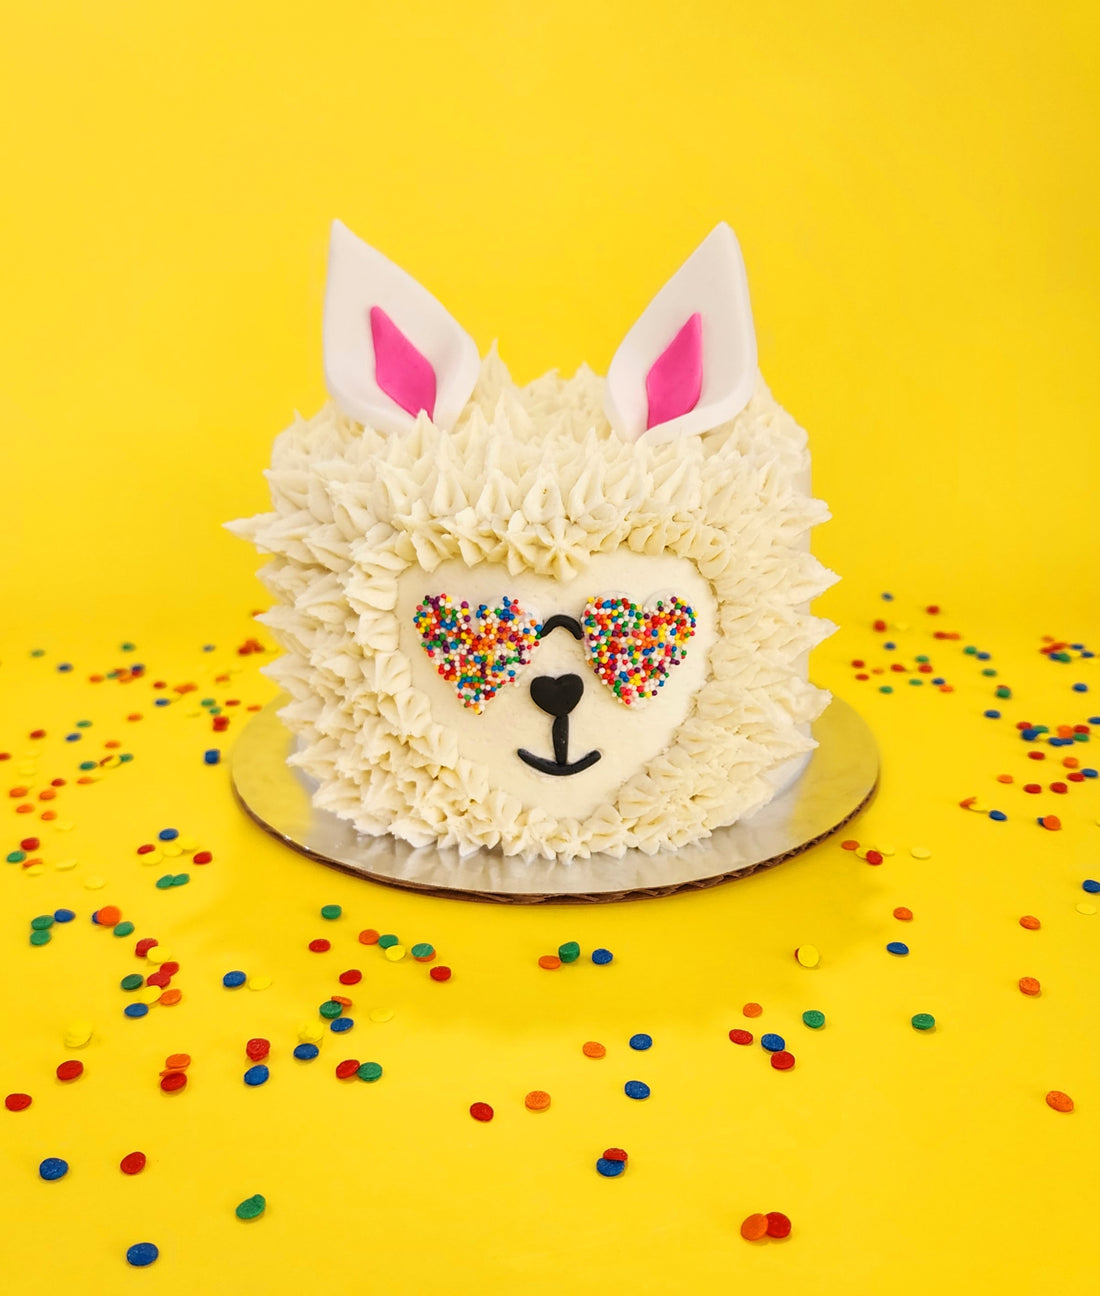 Cute llama cake piped with white frosting hair, pink and black fondant details, and heart-shaped sunglasses covered in rainbow sprinkles.